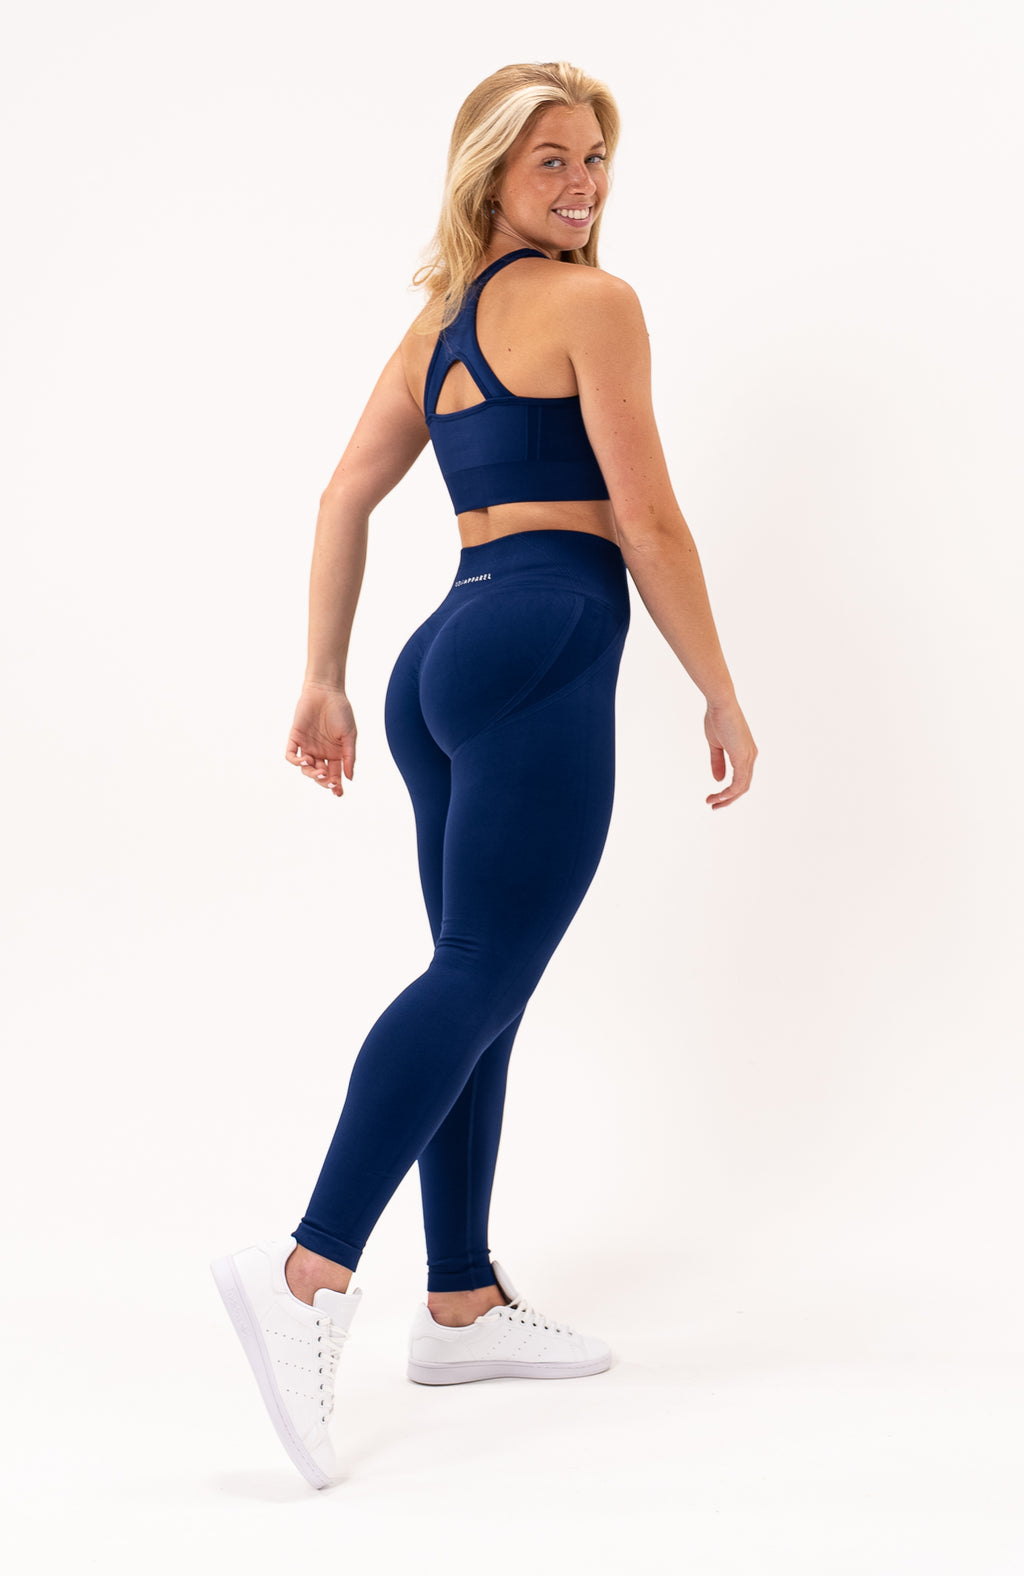 V3 Apparel Womens 2-Piece Tempo Seamless Scrunch Workout Outfit - Royal  Blue - Gym Workout Leggings & Fitness Sports Bra